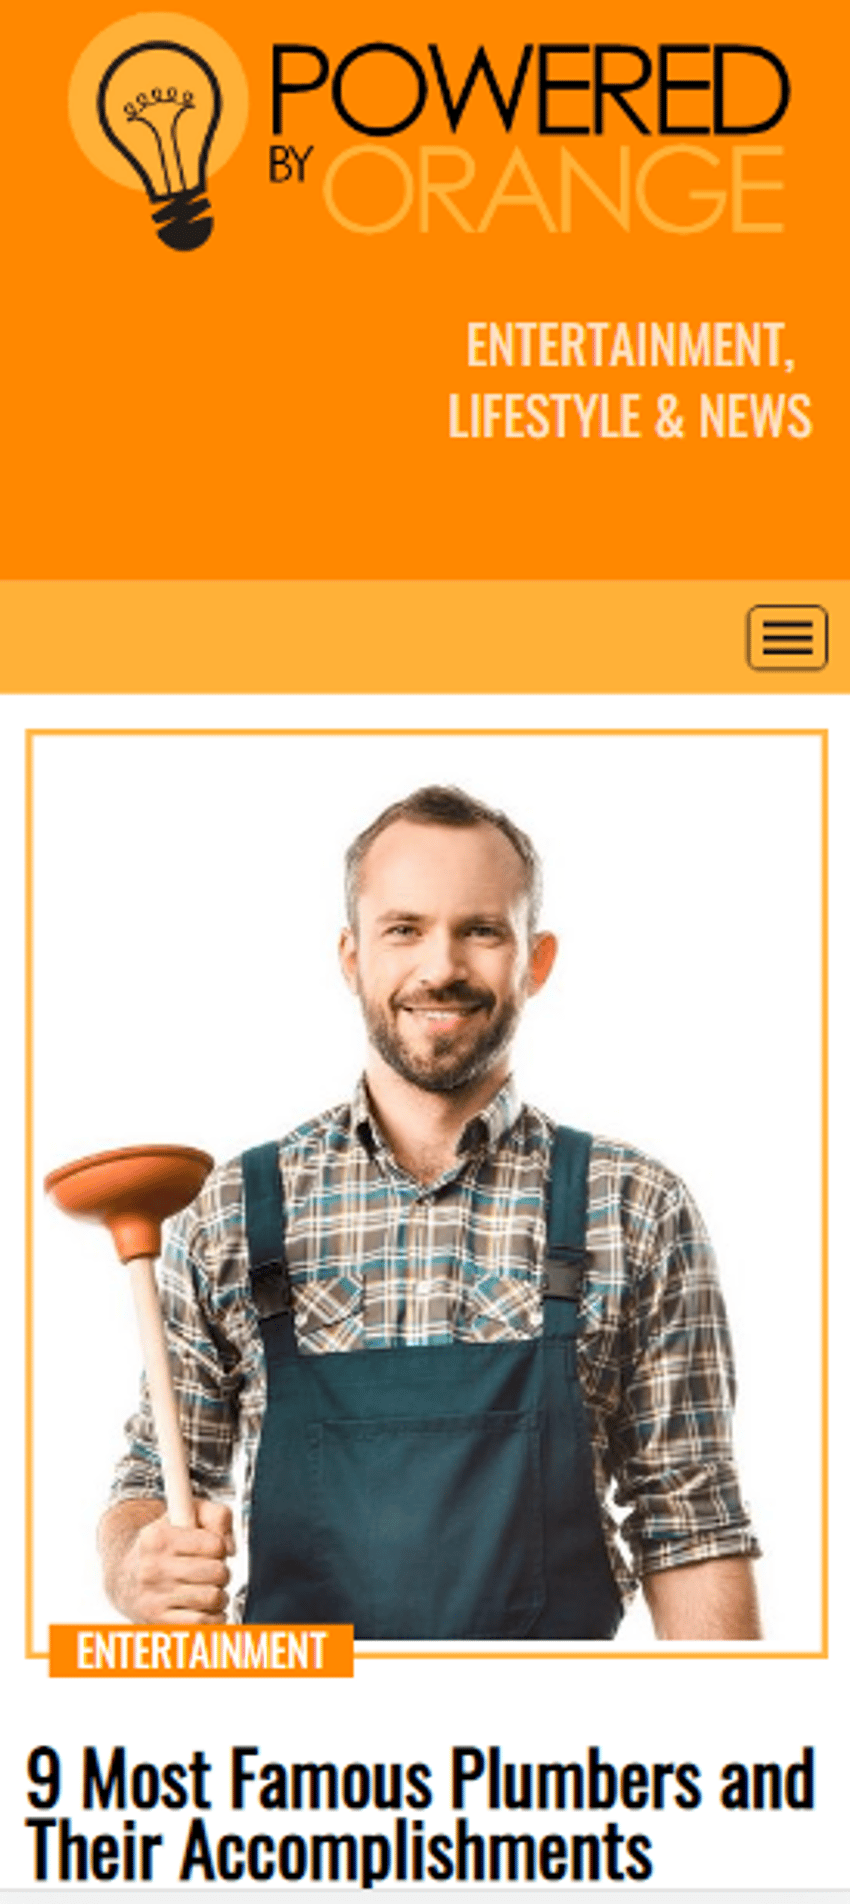 check out the full post [here](https://poweredbyorange.com/9-most-famous-plumbers-and-their-accomplishments/)